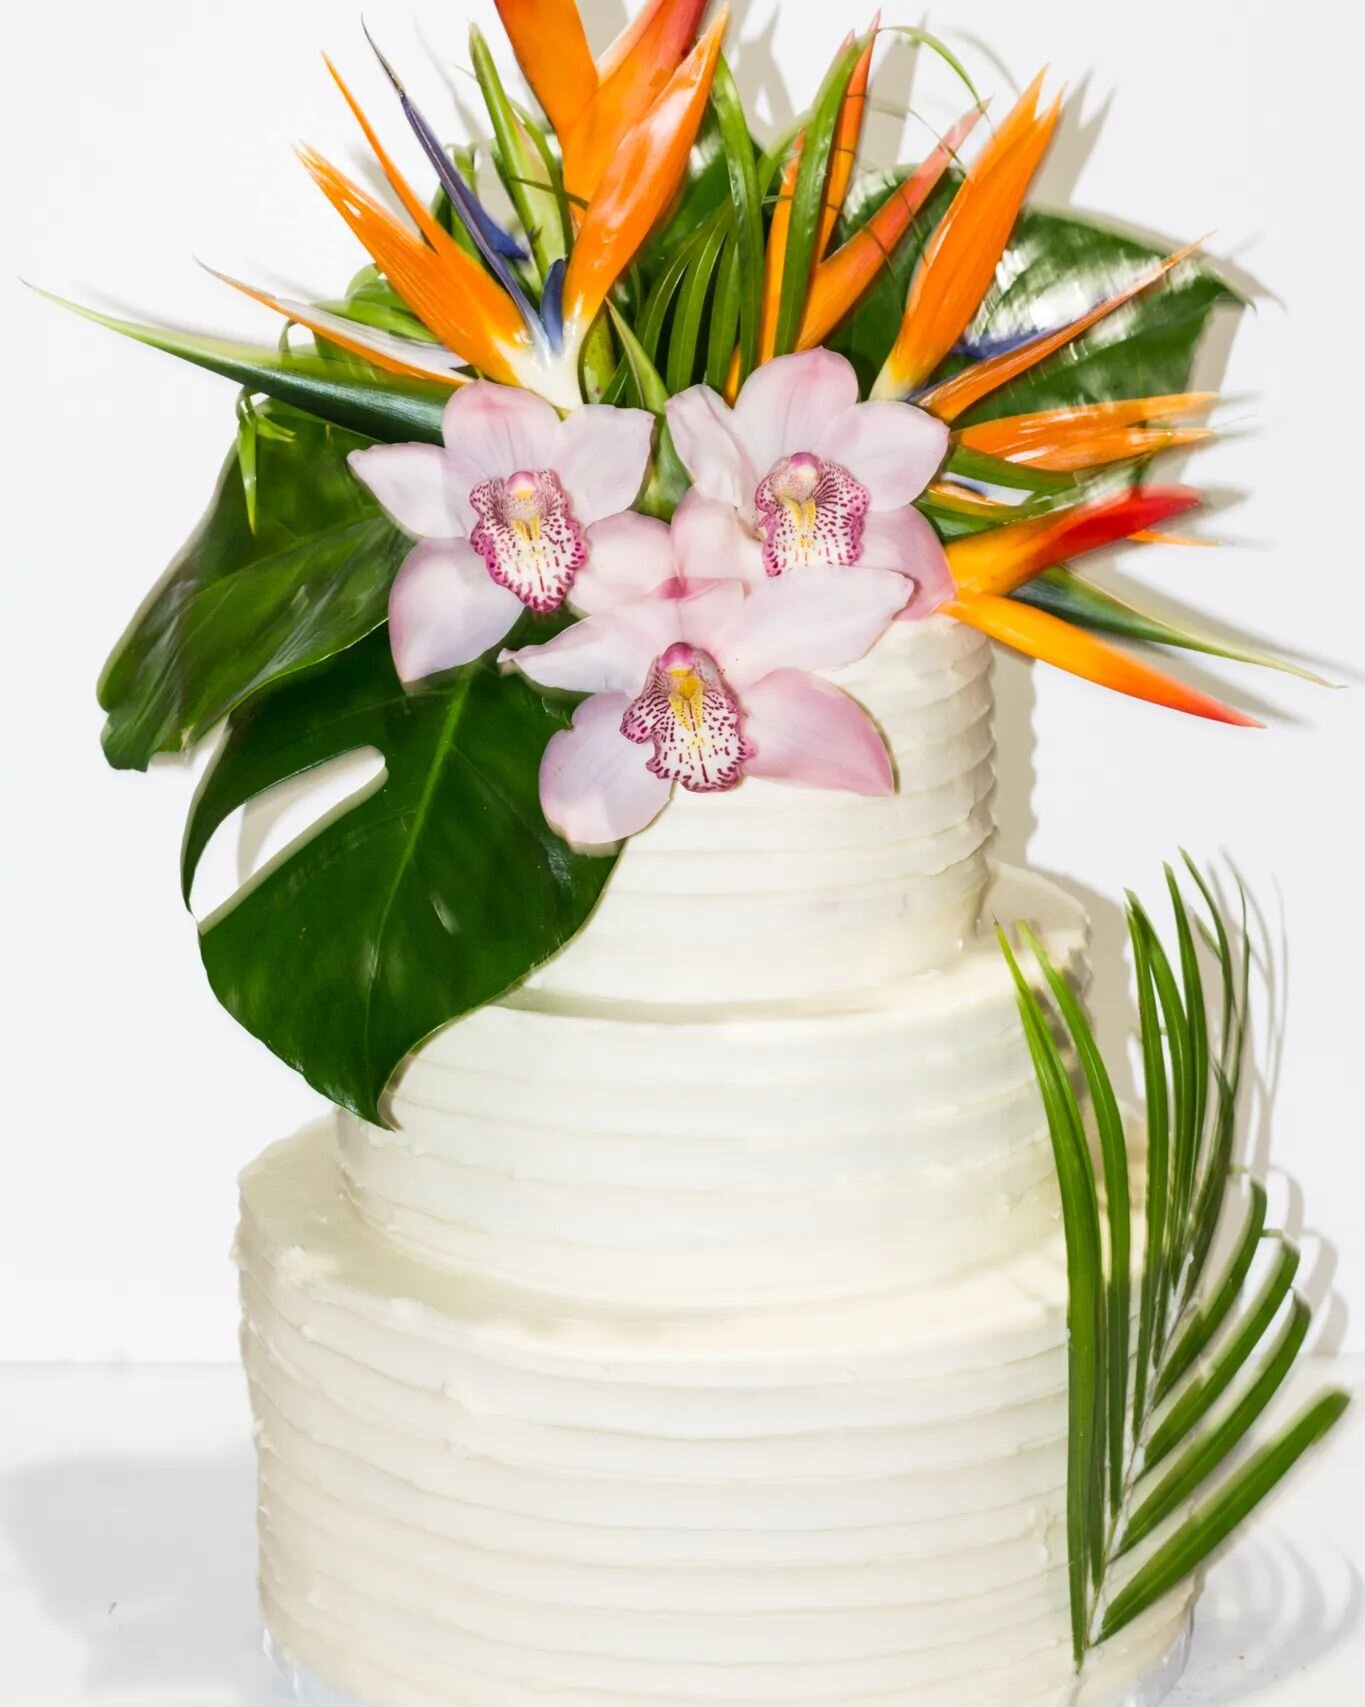 We are getting Wild this weekend! Each layer this cake has, holds its own exotic flavor, and we dont stop there.  Not only are the layers of cake different flavors, the buttercream topping each layer, matches the flavor of cake! 

We have Pina Colada